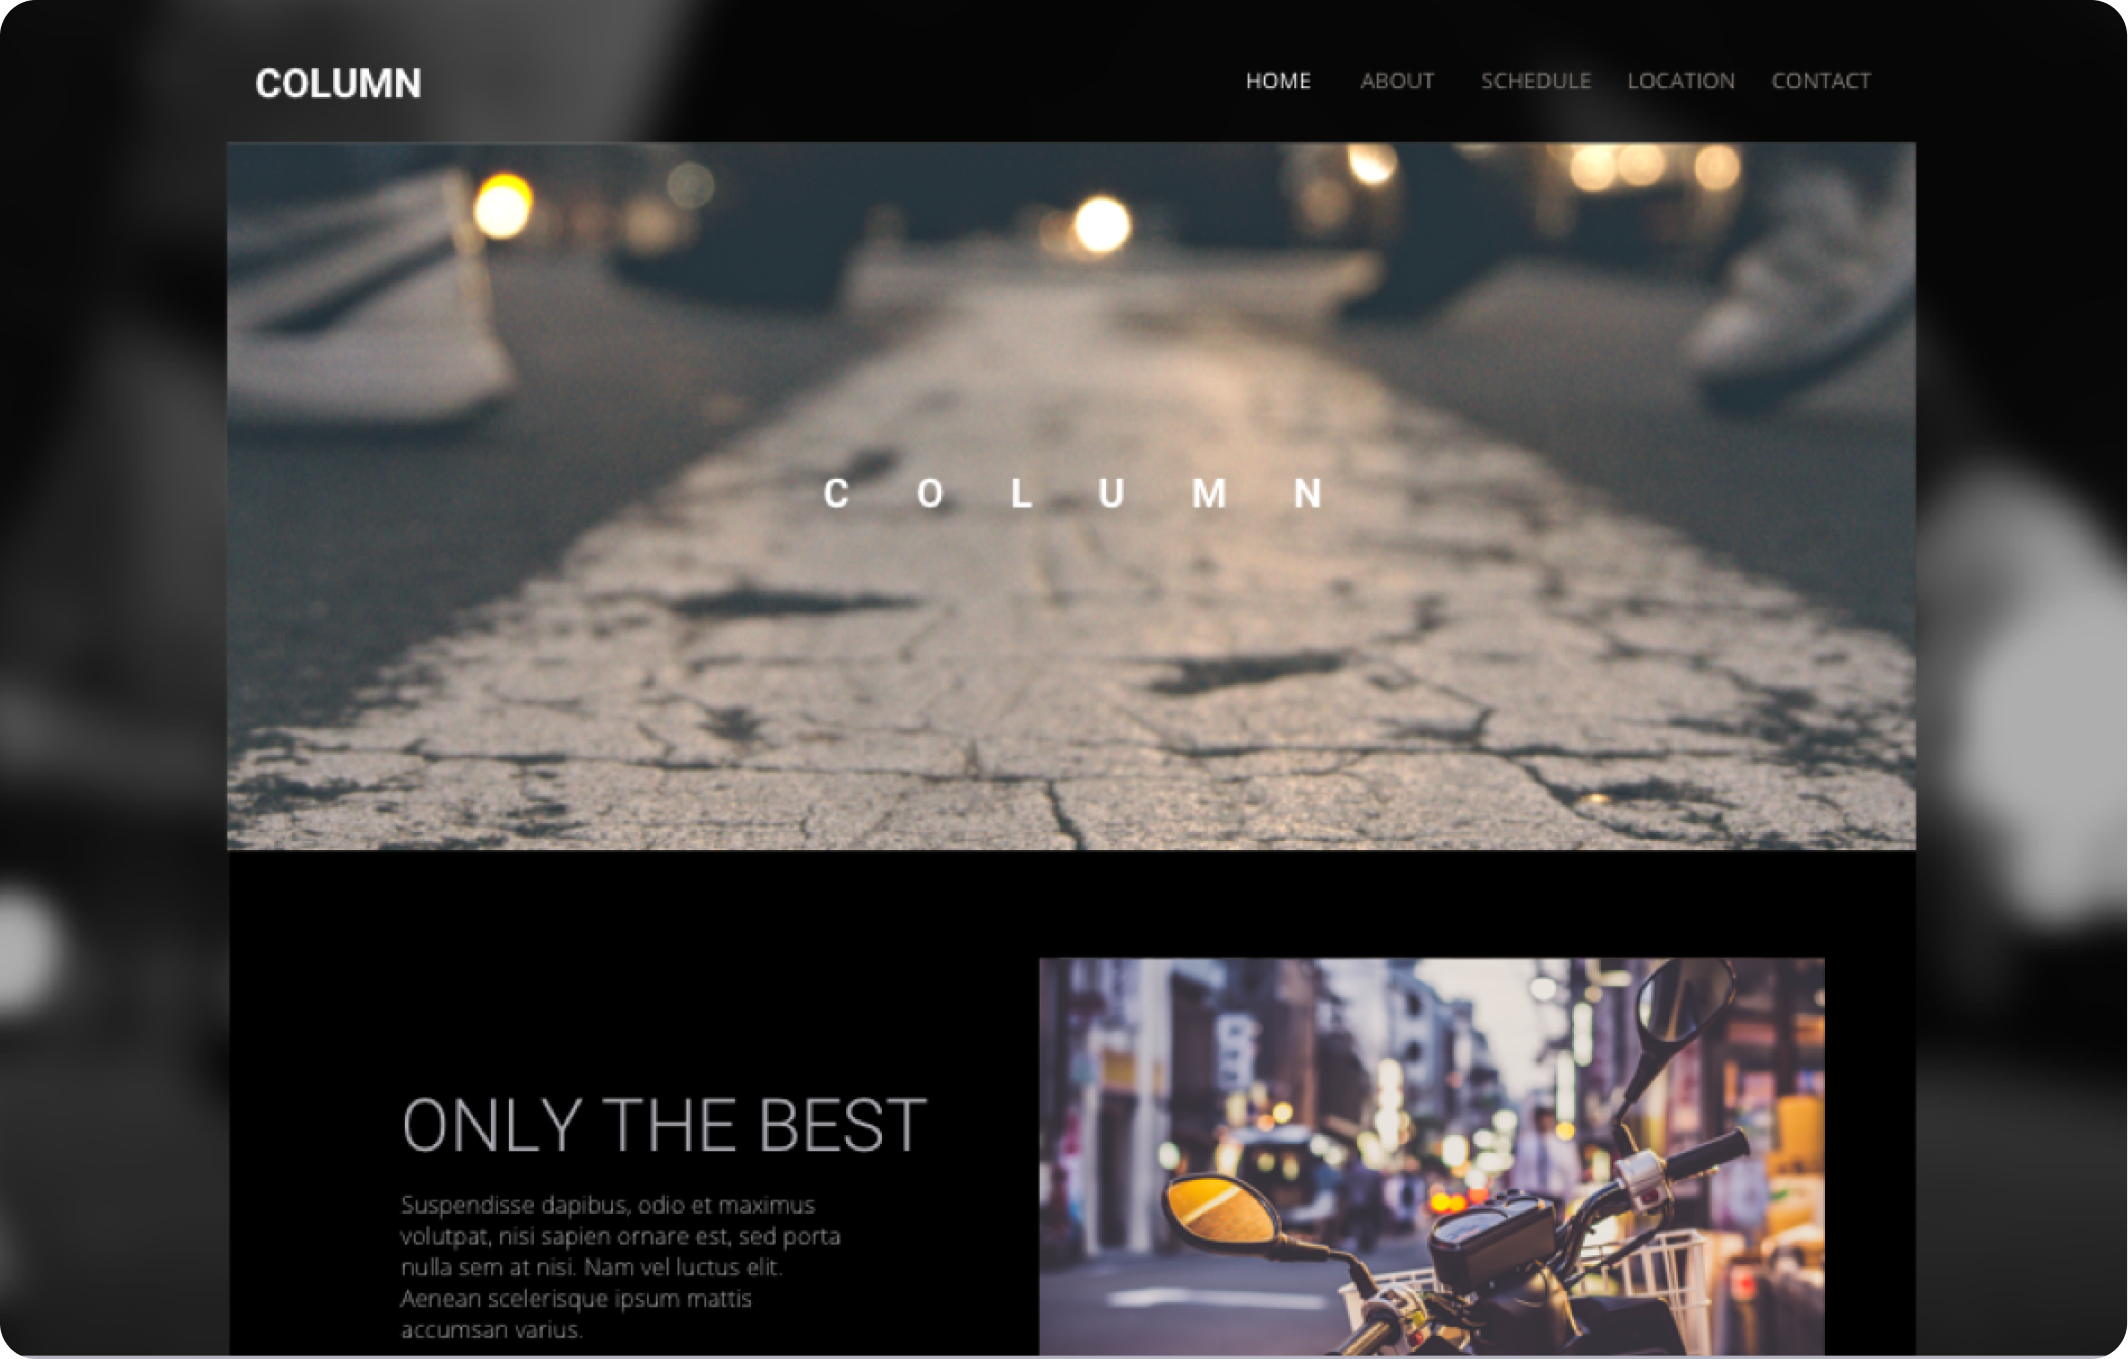 website template with large header image of a line on pavement used for news and article columns